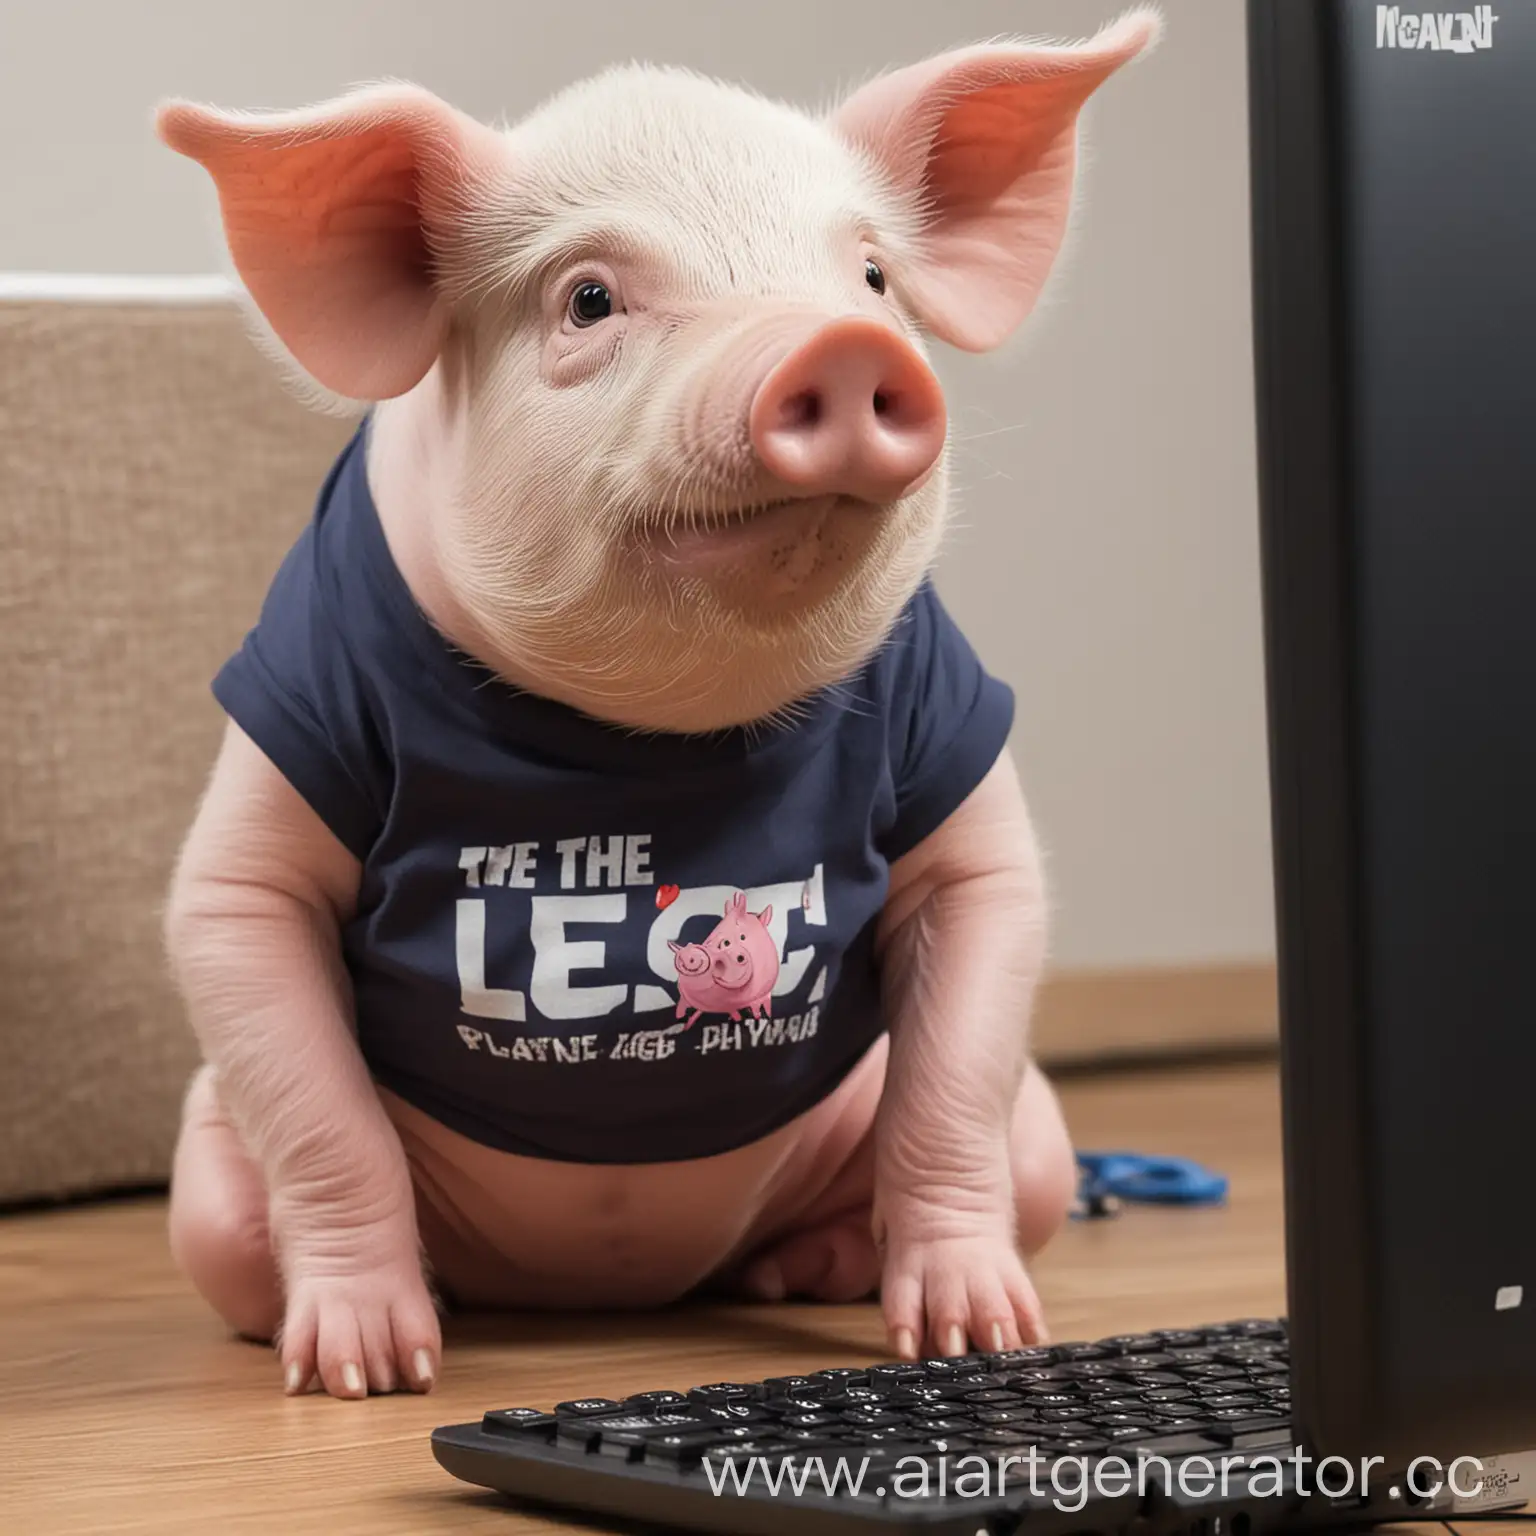 Playful-Pig-Wearing-theleg1t3-TShirt-Engaged-in-Computer-Activity